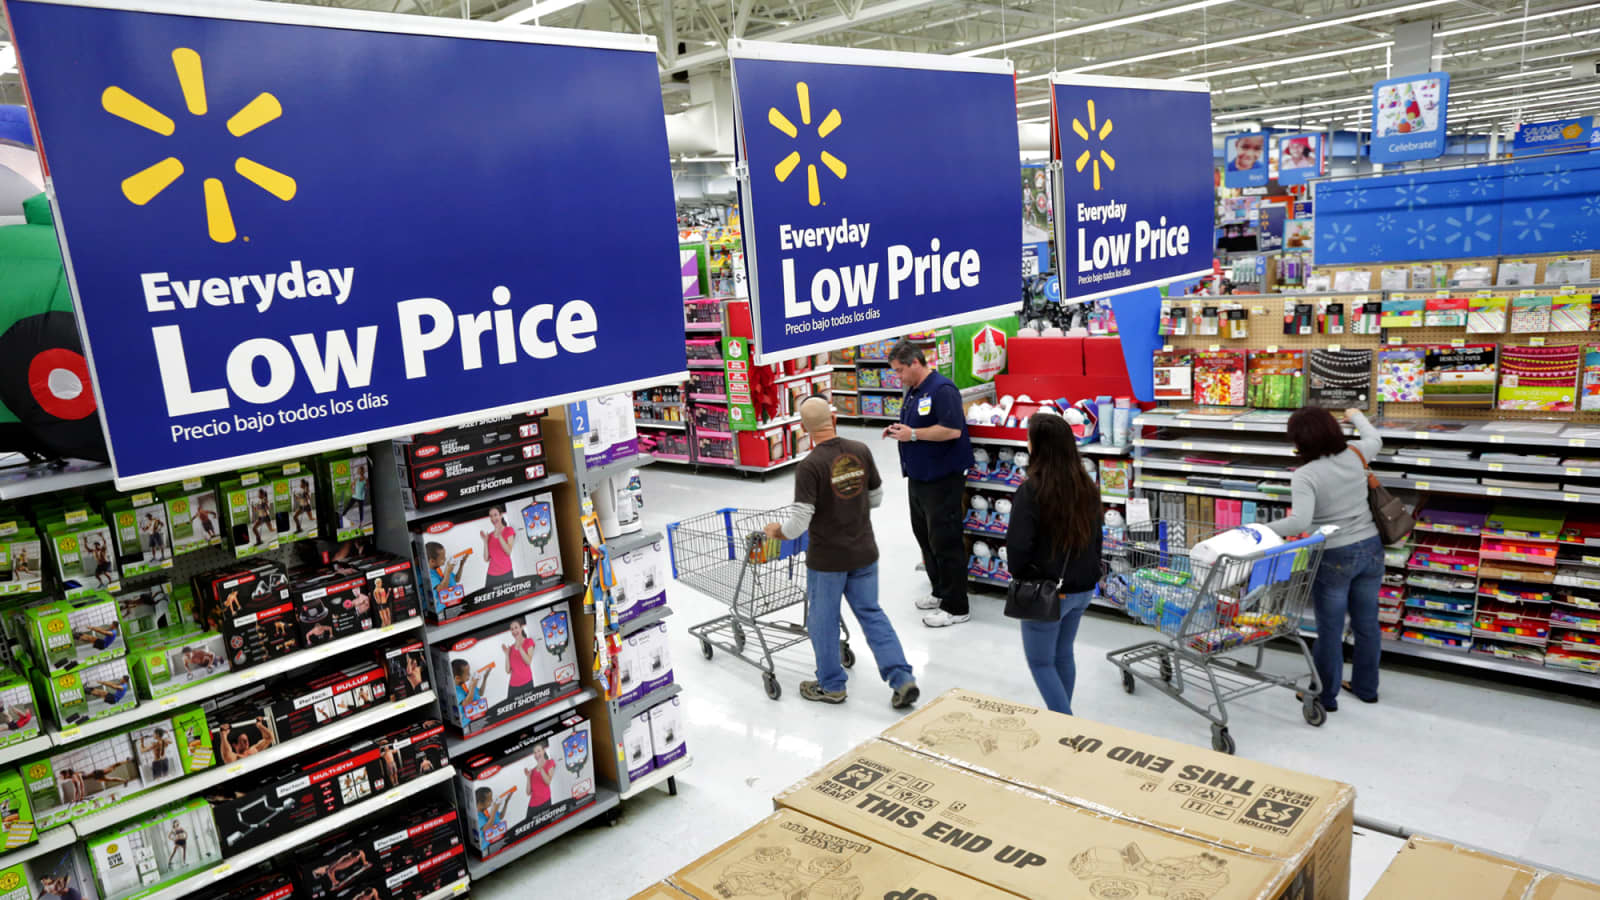 10 reasons to buy Wal-Mart right now, according to Jefferies